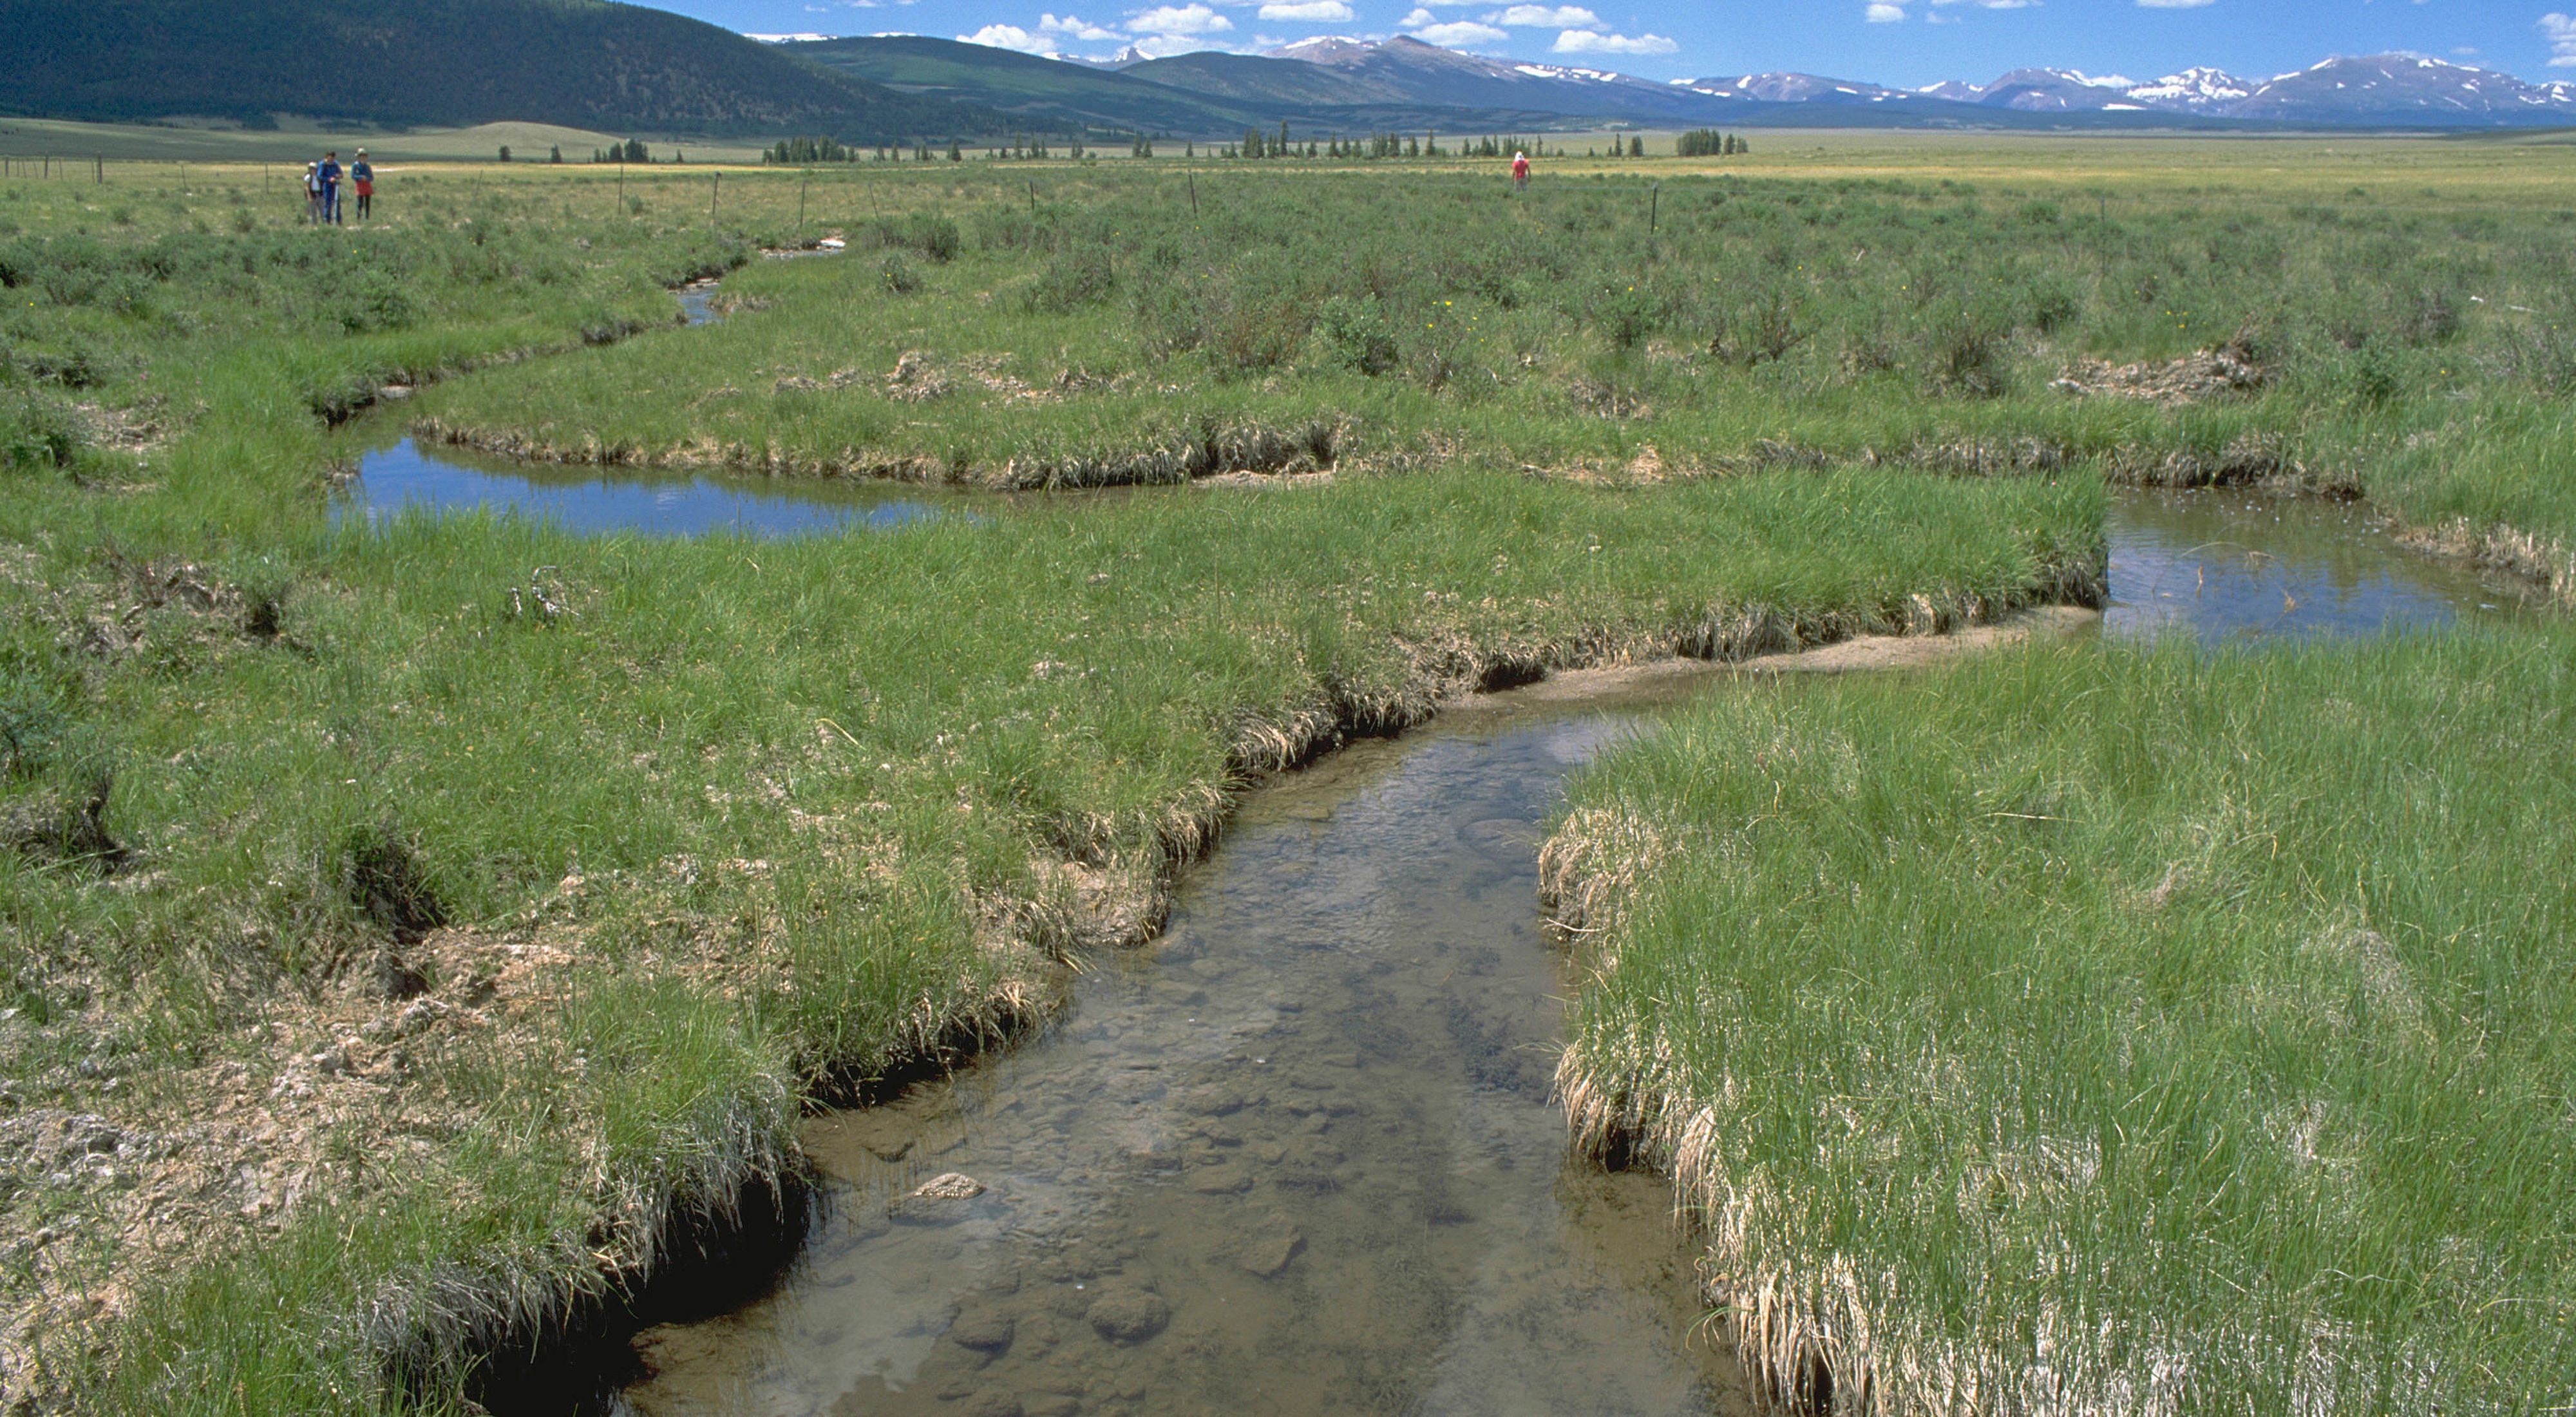 A shallow meandering creek running through grassy fields with mountains in the far distance.